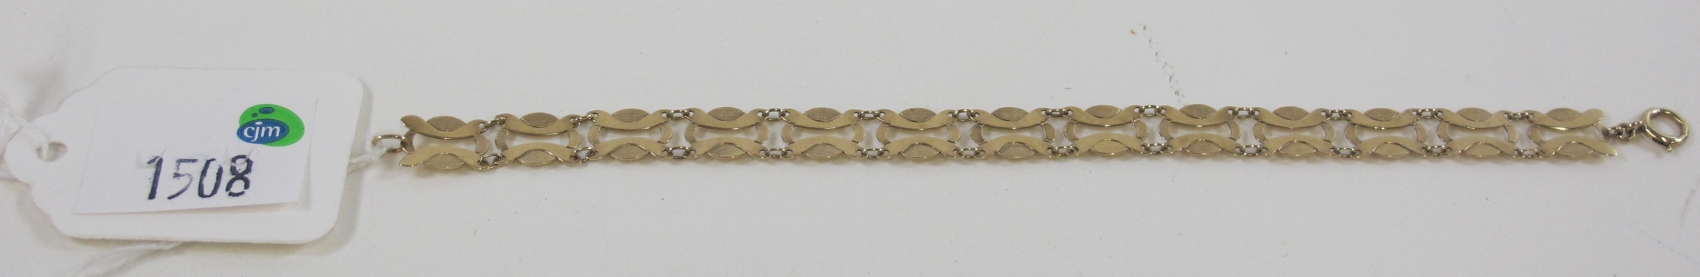 This is a Timed Online Auction on Bidspotter.co.uk, Click here to bid. Vintage bracelet, marked '